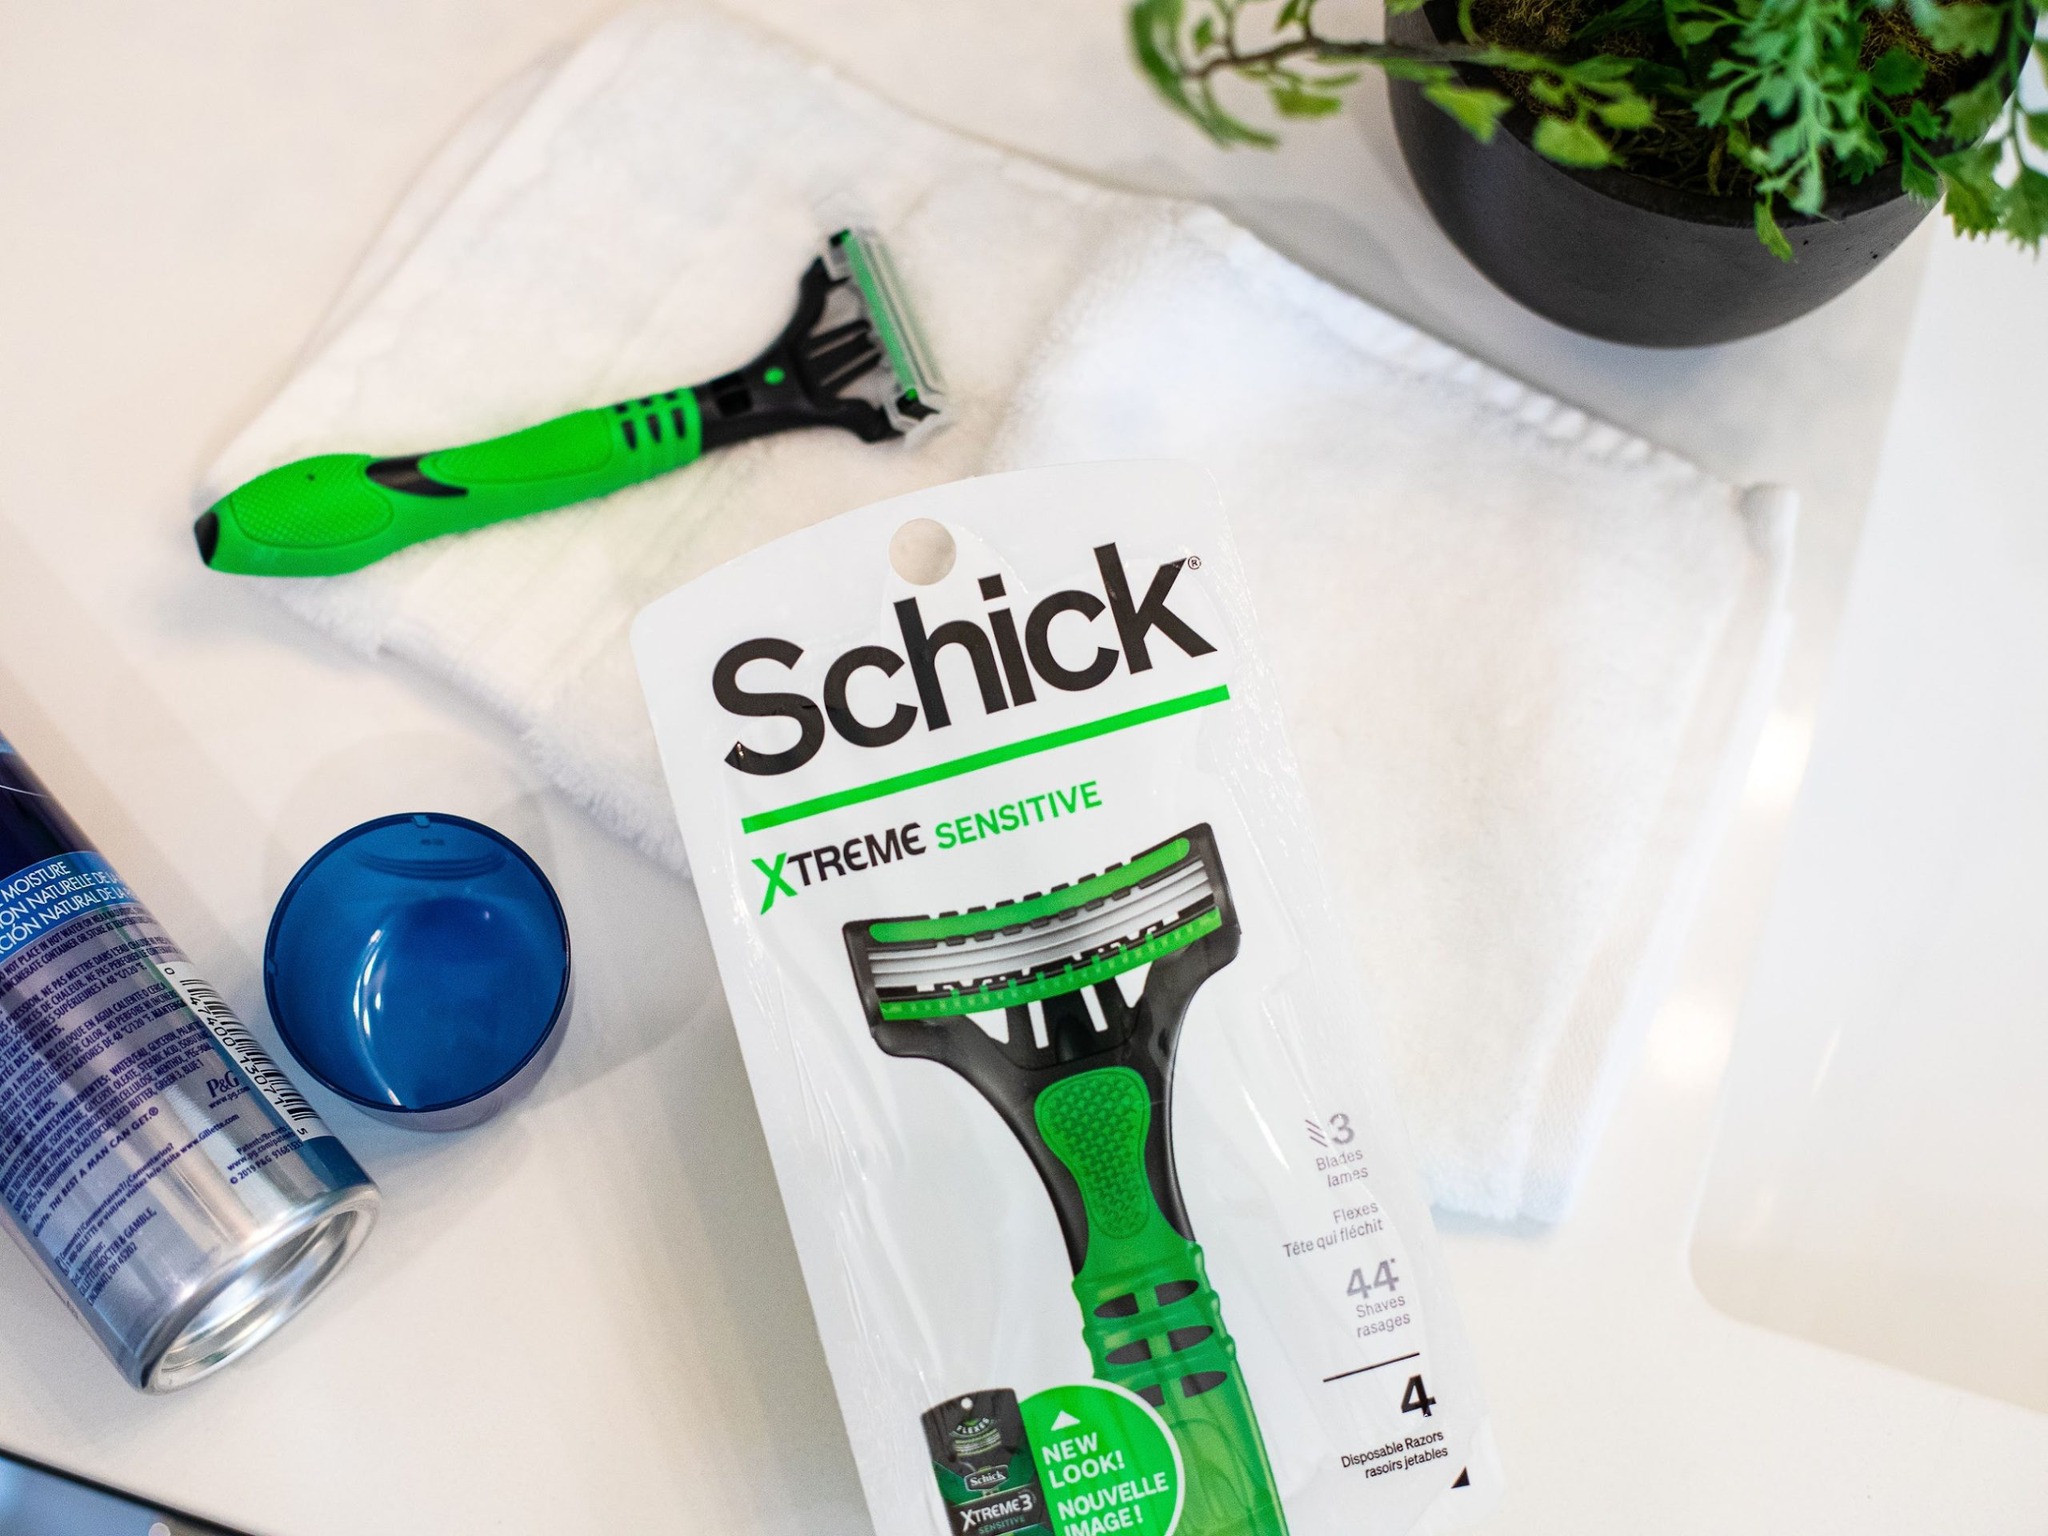 Schick Disposable Razors As Low As 49¢ At Kroger